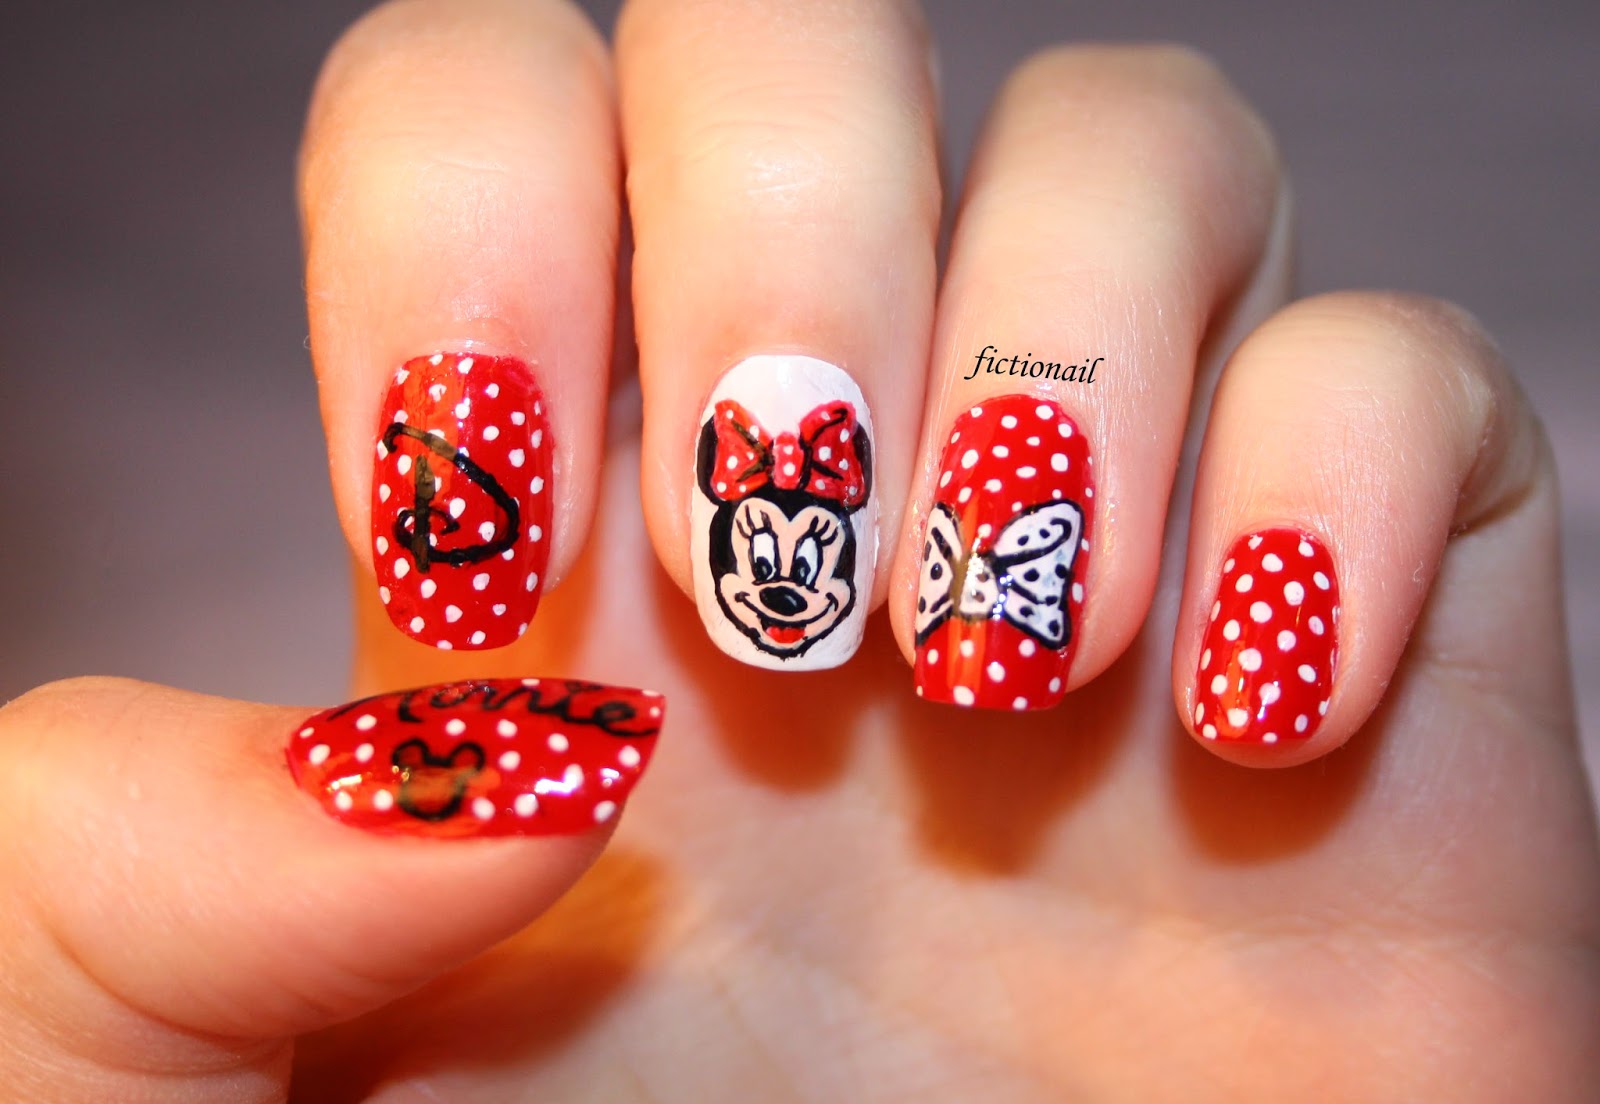 2. Minnie Mouse Fall Nail Art - wide 4